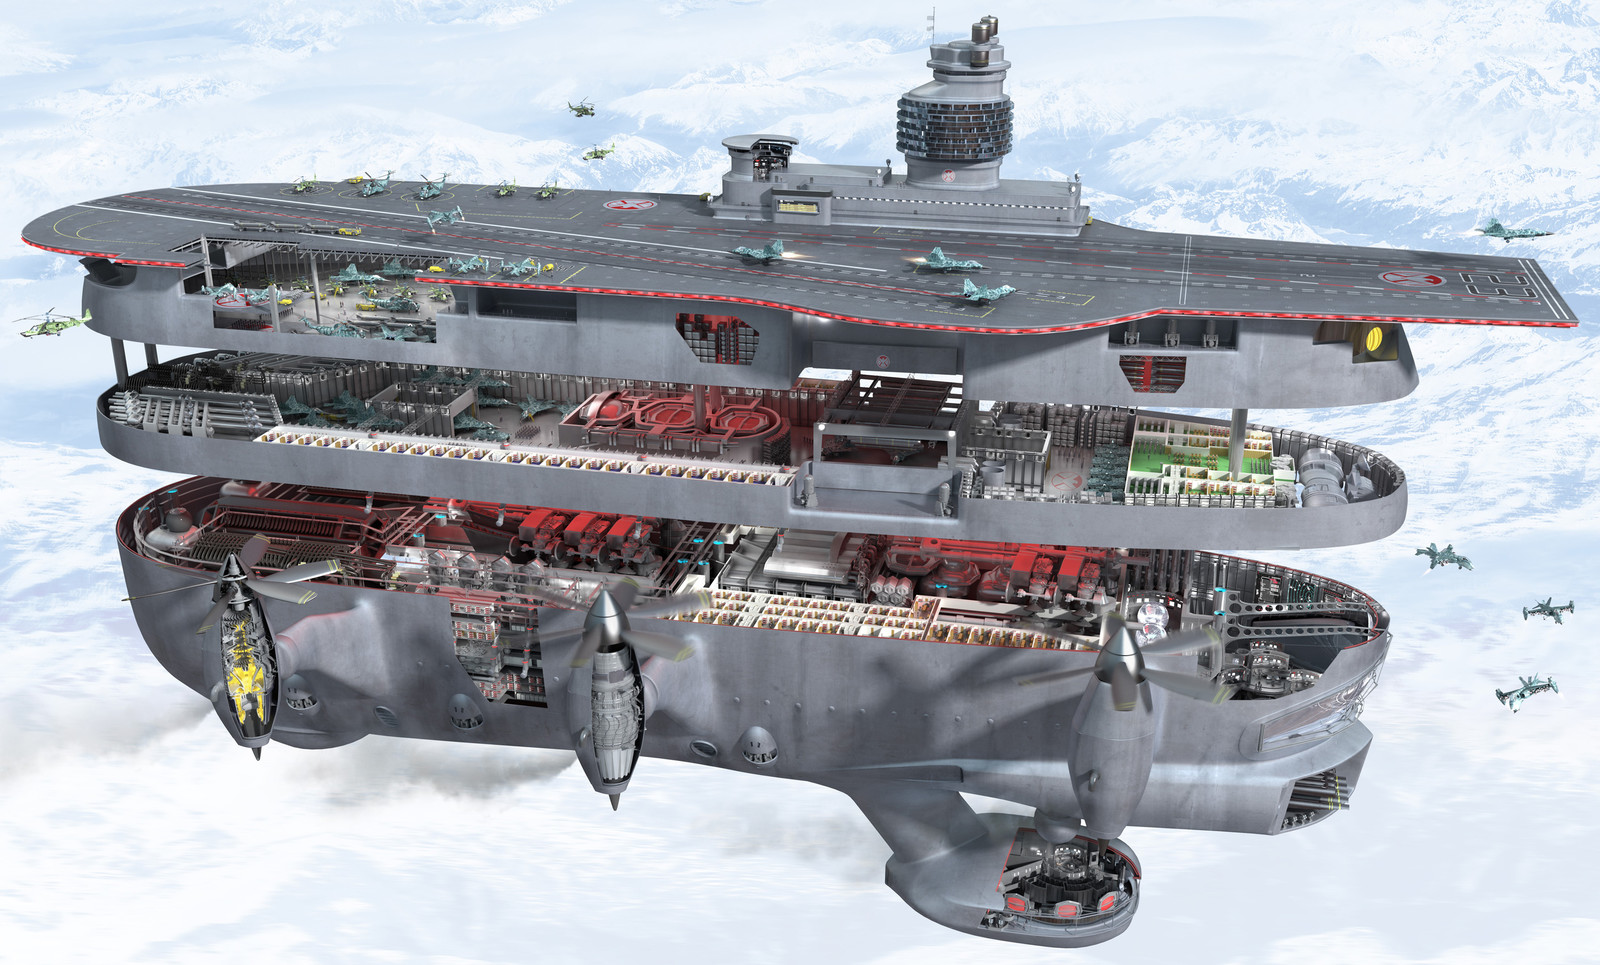 S.H.I.E.L.D Helicarrier Cutaway, with a crew up to 1000 and an operating speed of 35Mph (56Kph) it is a huge air craft.